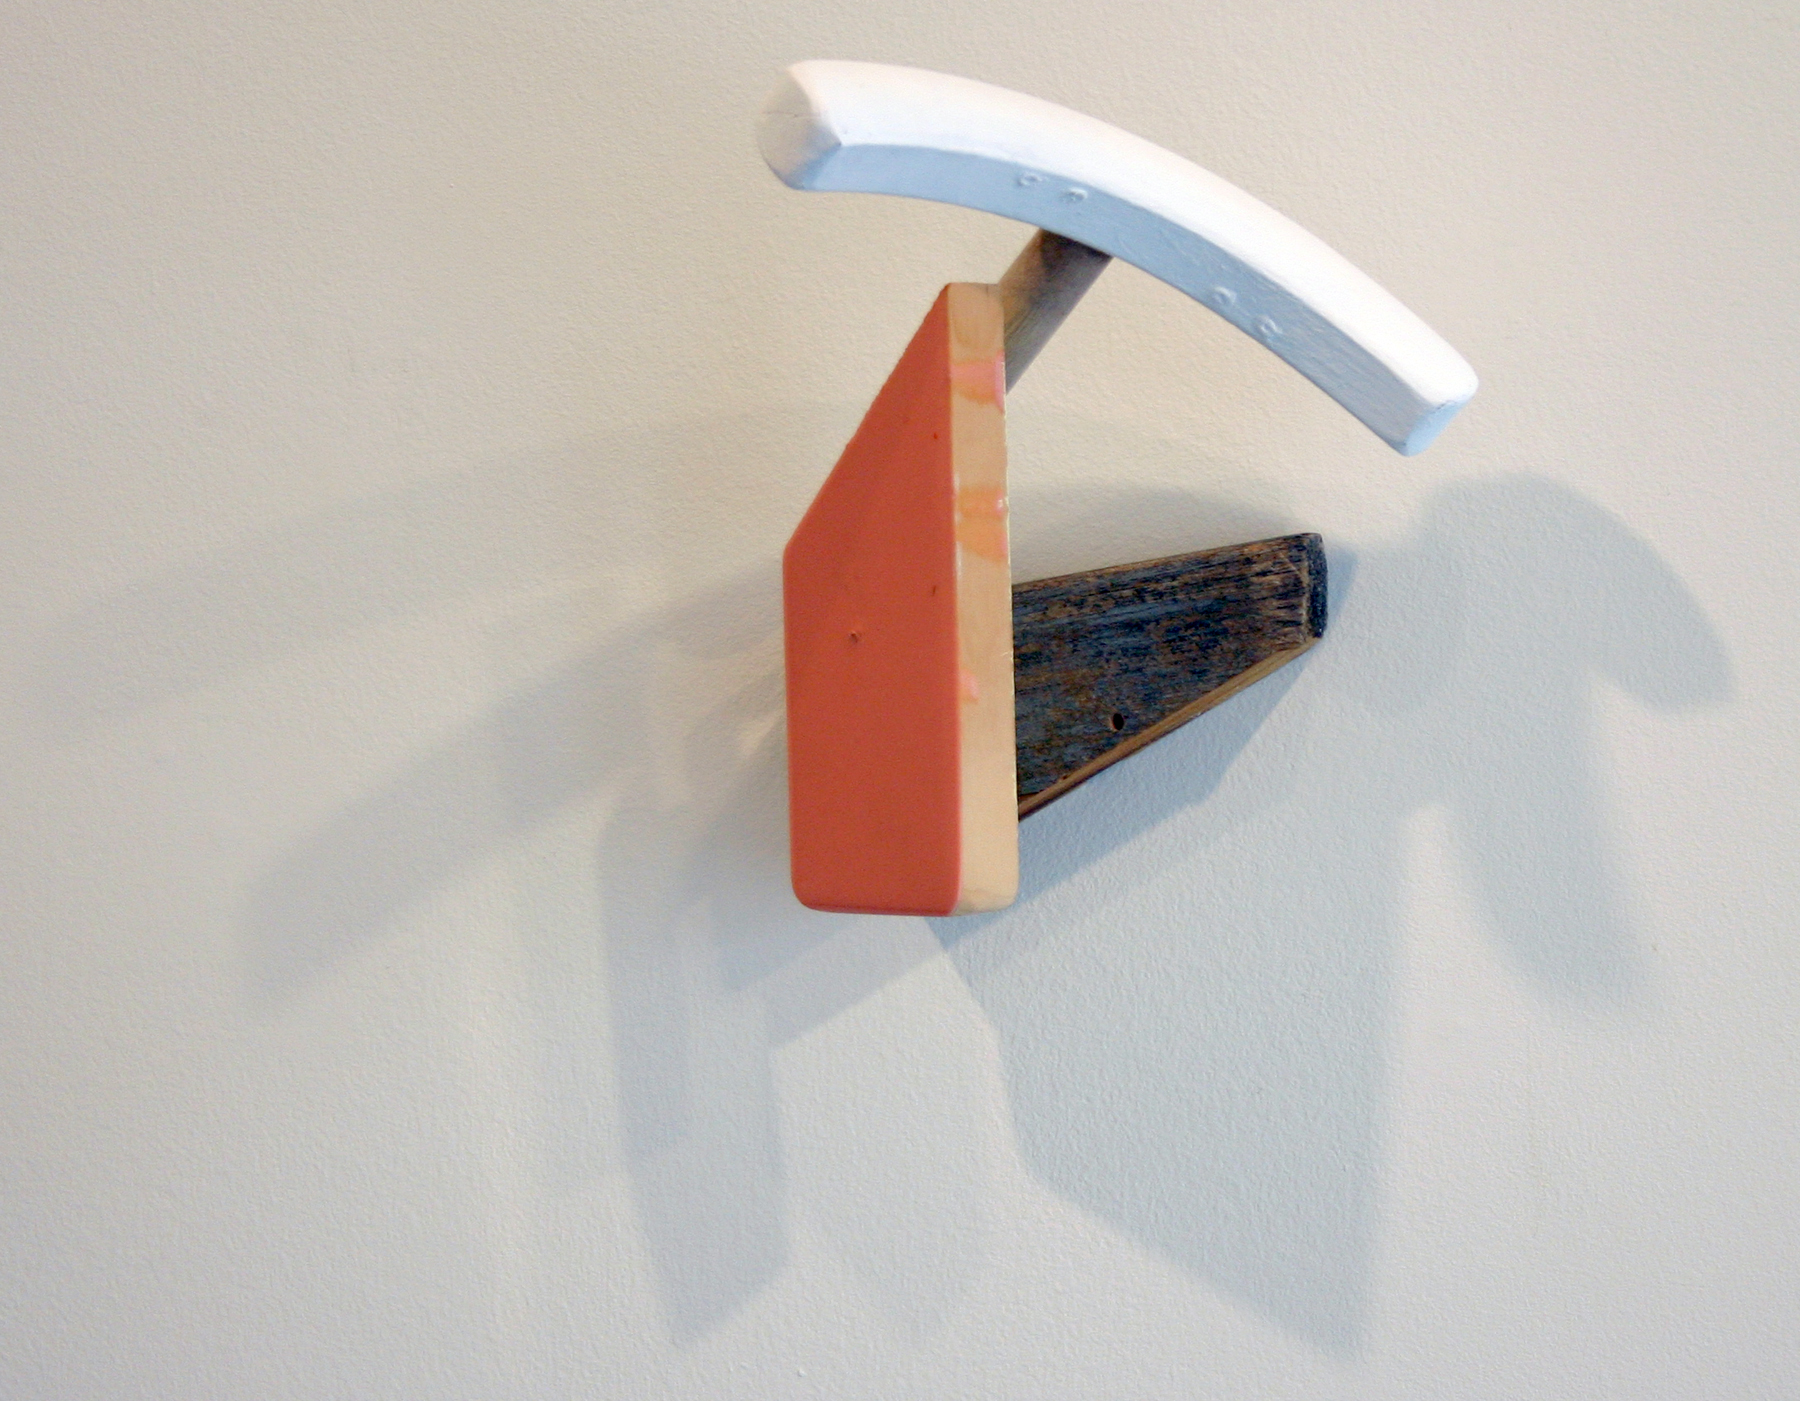   KIRK STOLLER   Untitled (crescent),&nbsp; wood, paint and resin, 8.5" x 7" x 6.25", 2011 